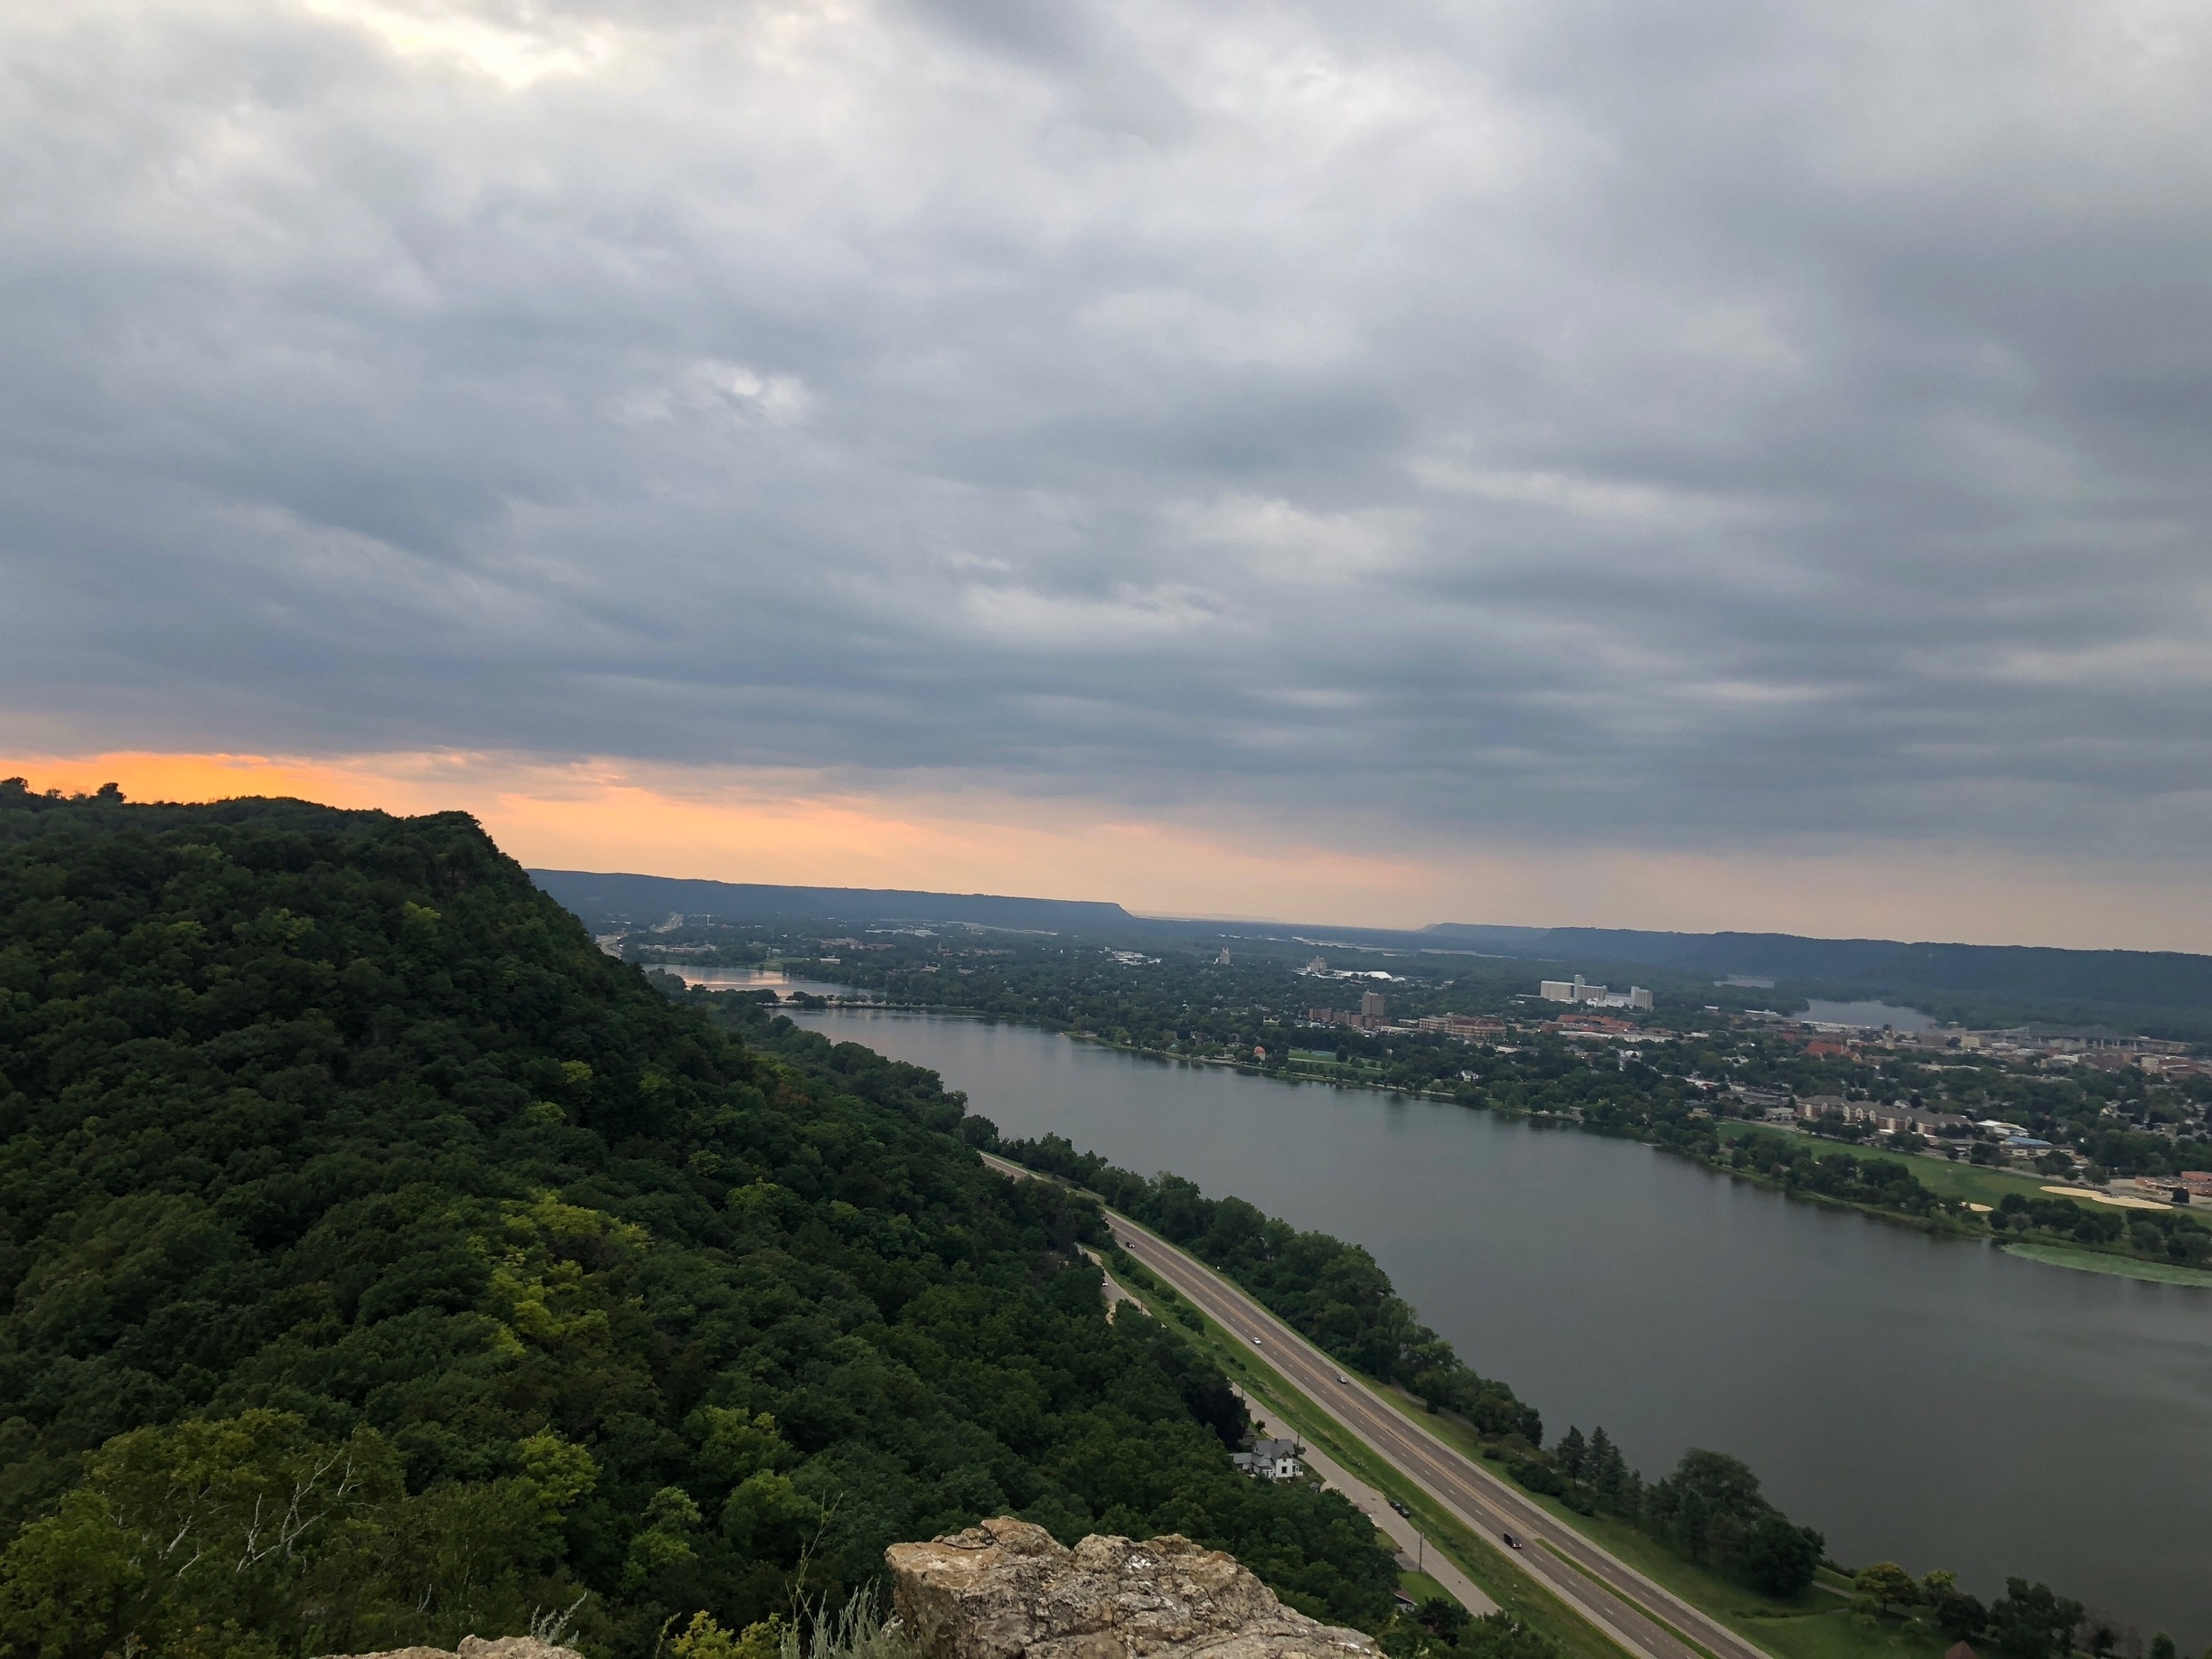 Sugarloaf trail....360 degree views from the top of sugar loaf of the Mississippi River valley. 28 routes for rock climbing to the peak....nice hiking trail to the base! 